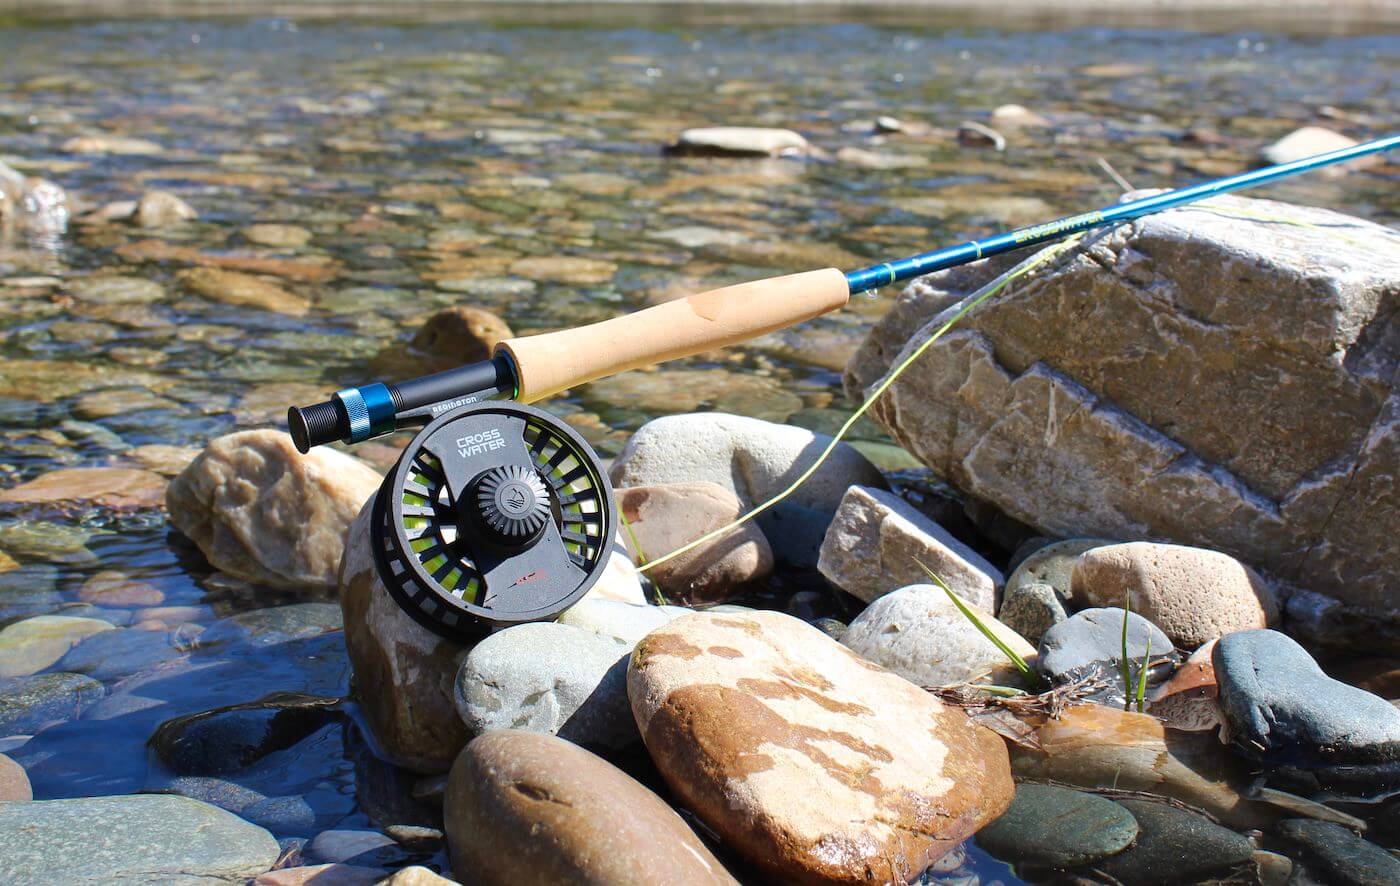 Redington Crosswater II Combo Fly Rod Outfit 